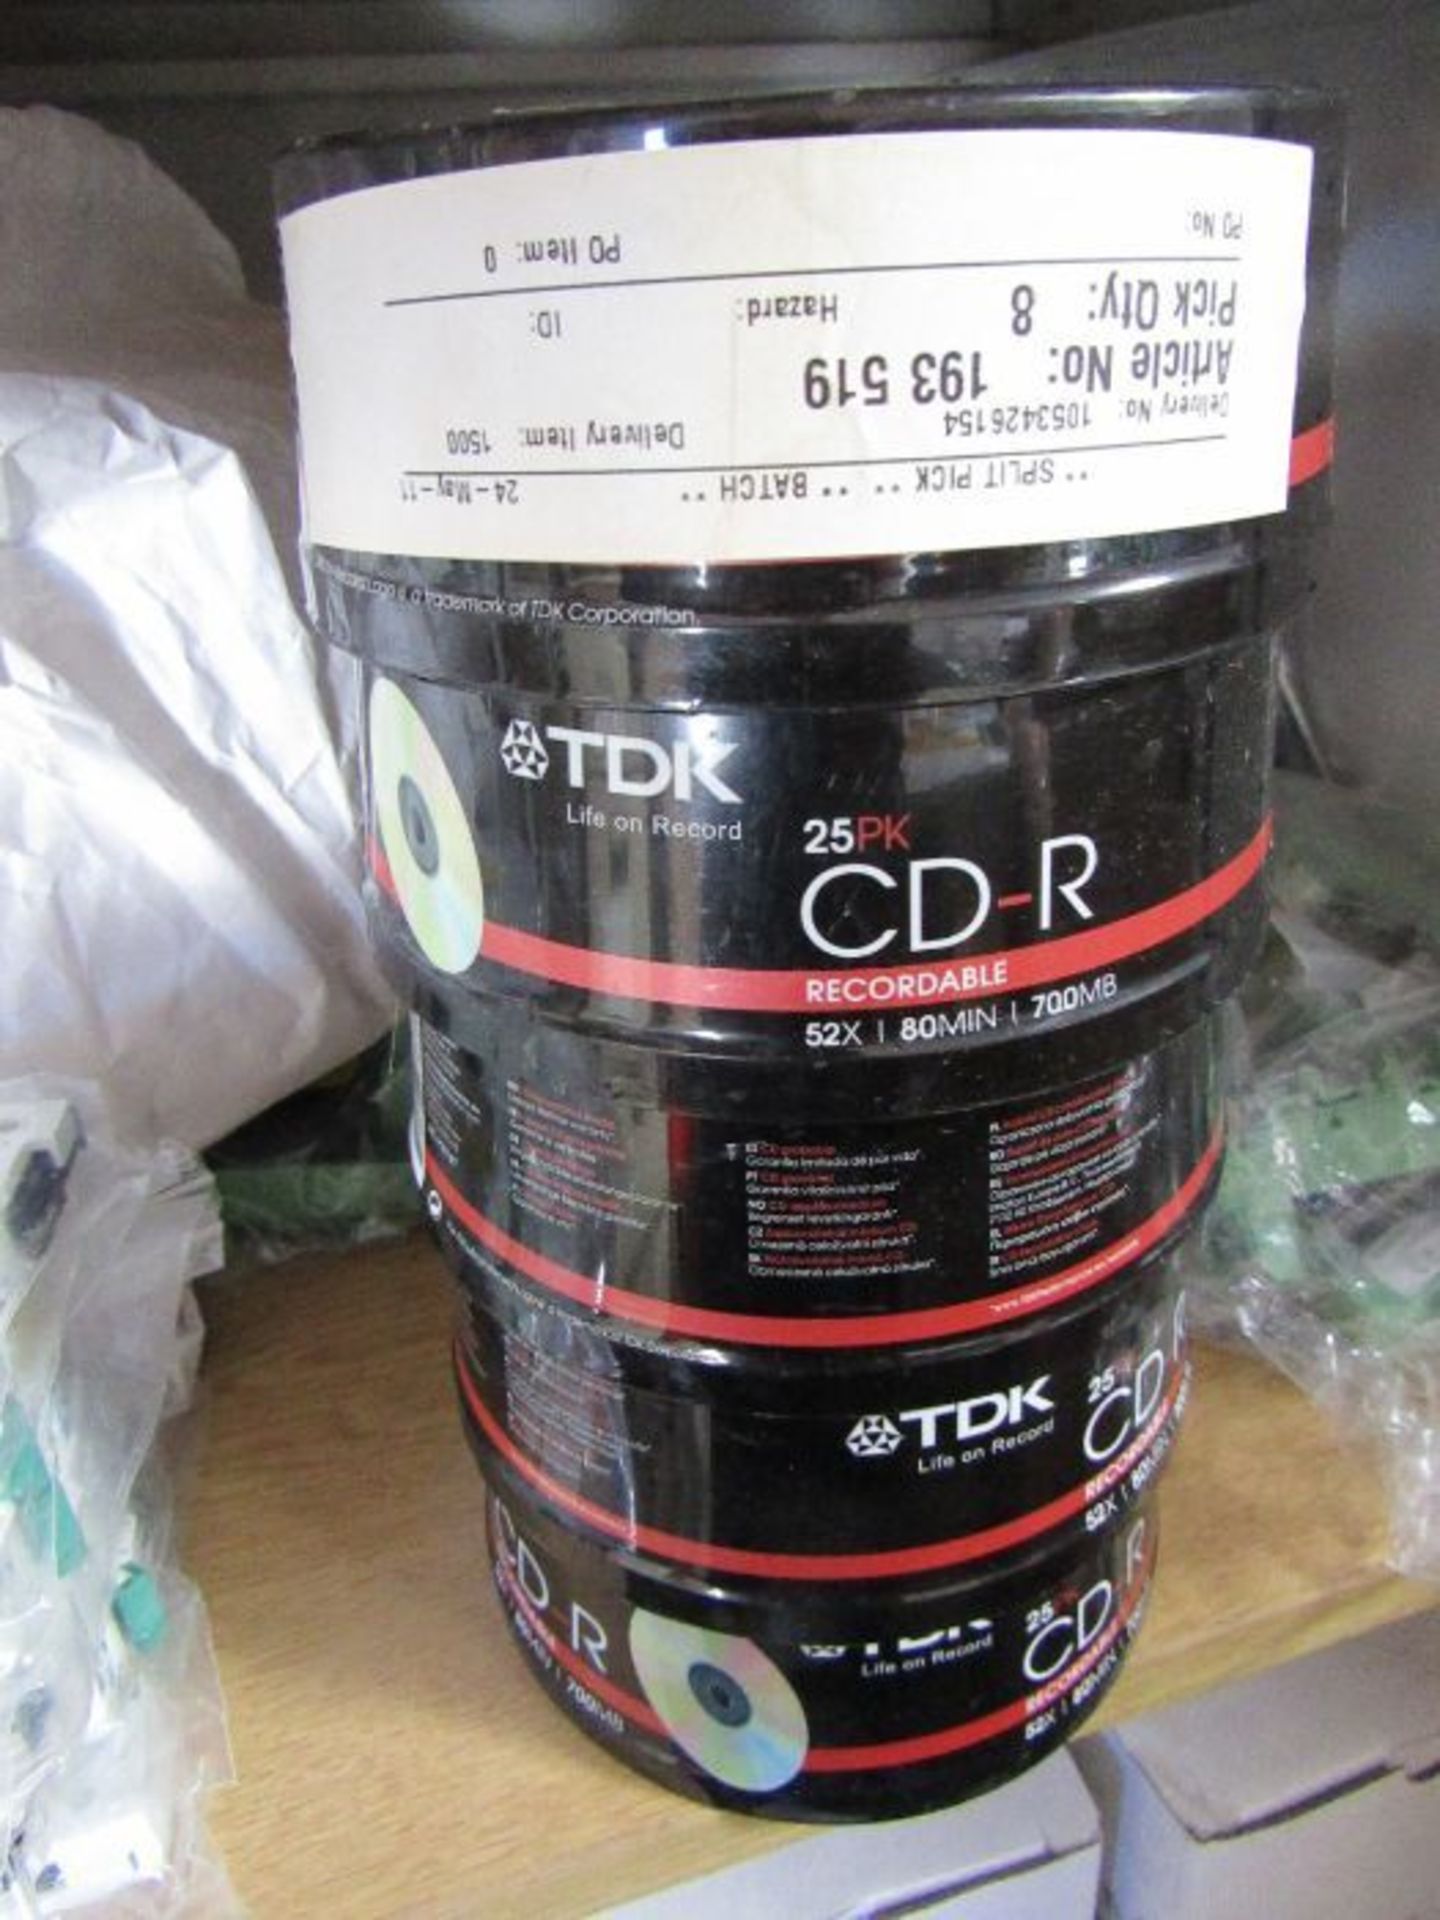 5 x Packs TDK CD-R 25 pack spindle 193519 and 12 x 25pk slim cd jewel cases